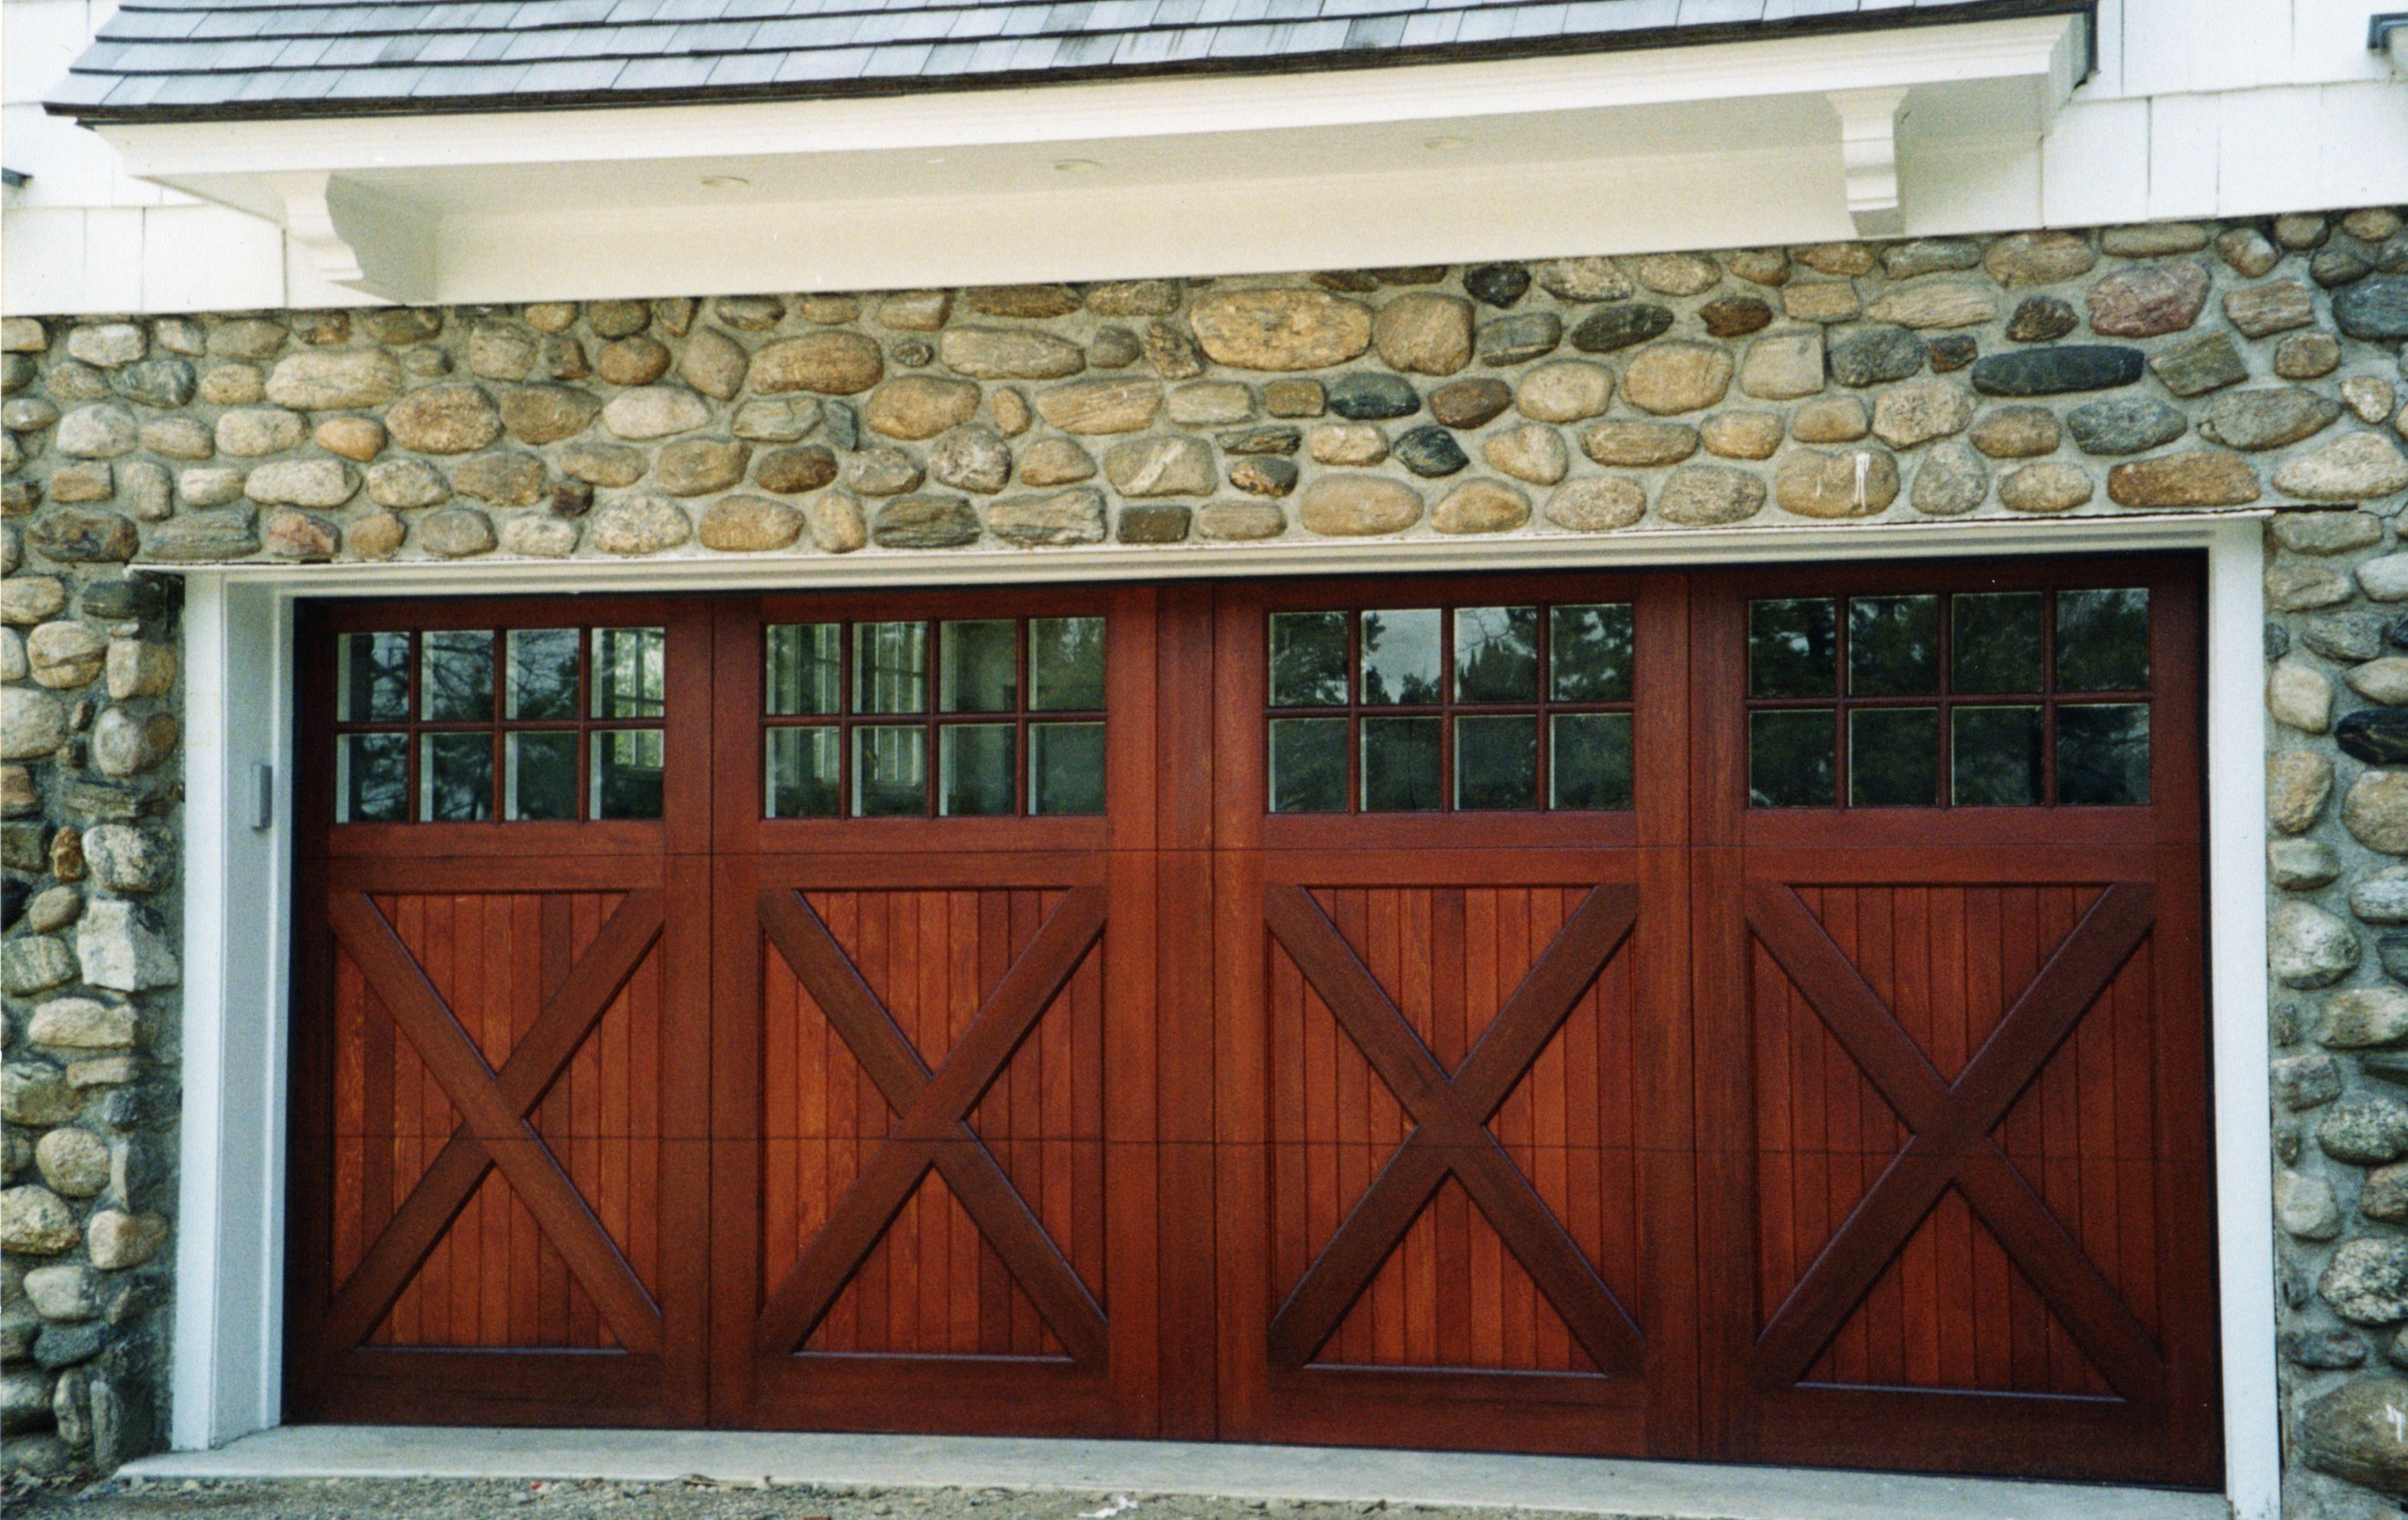 Installing Carriage Style Garage Doors to Improve Your Exterior | Ideas